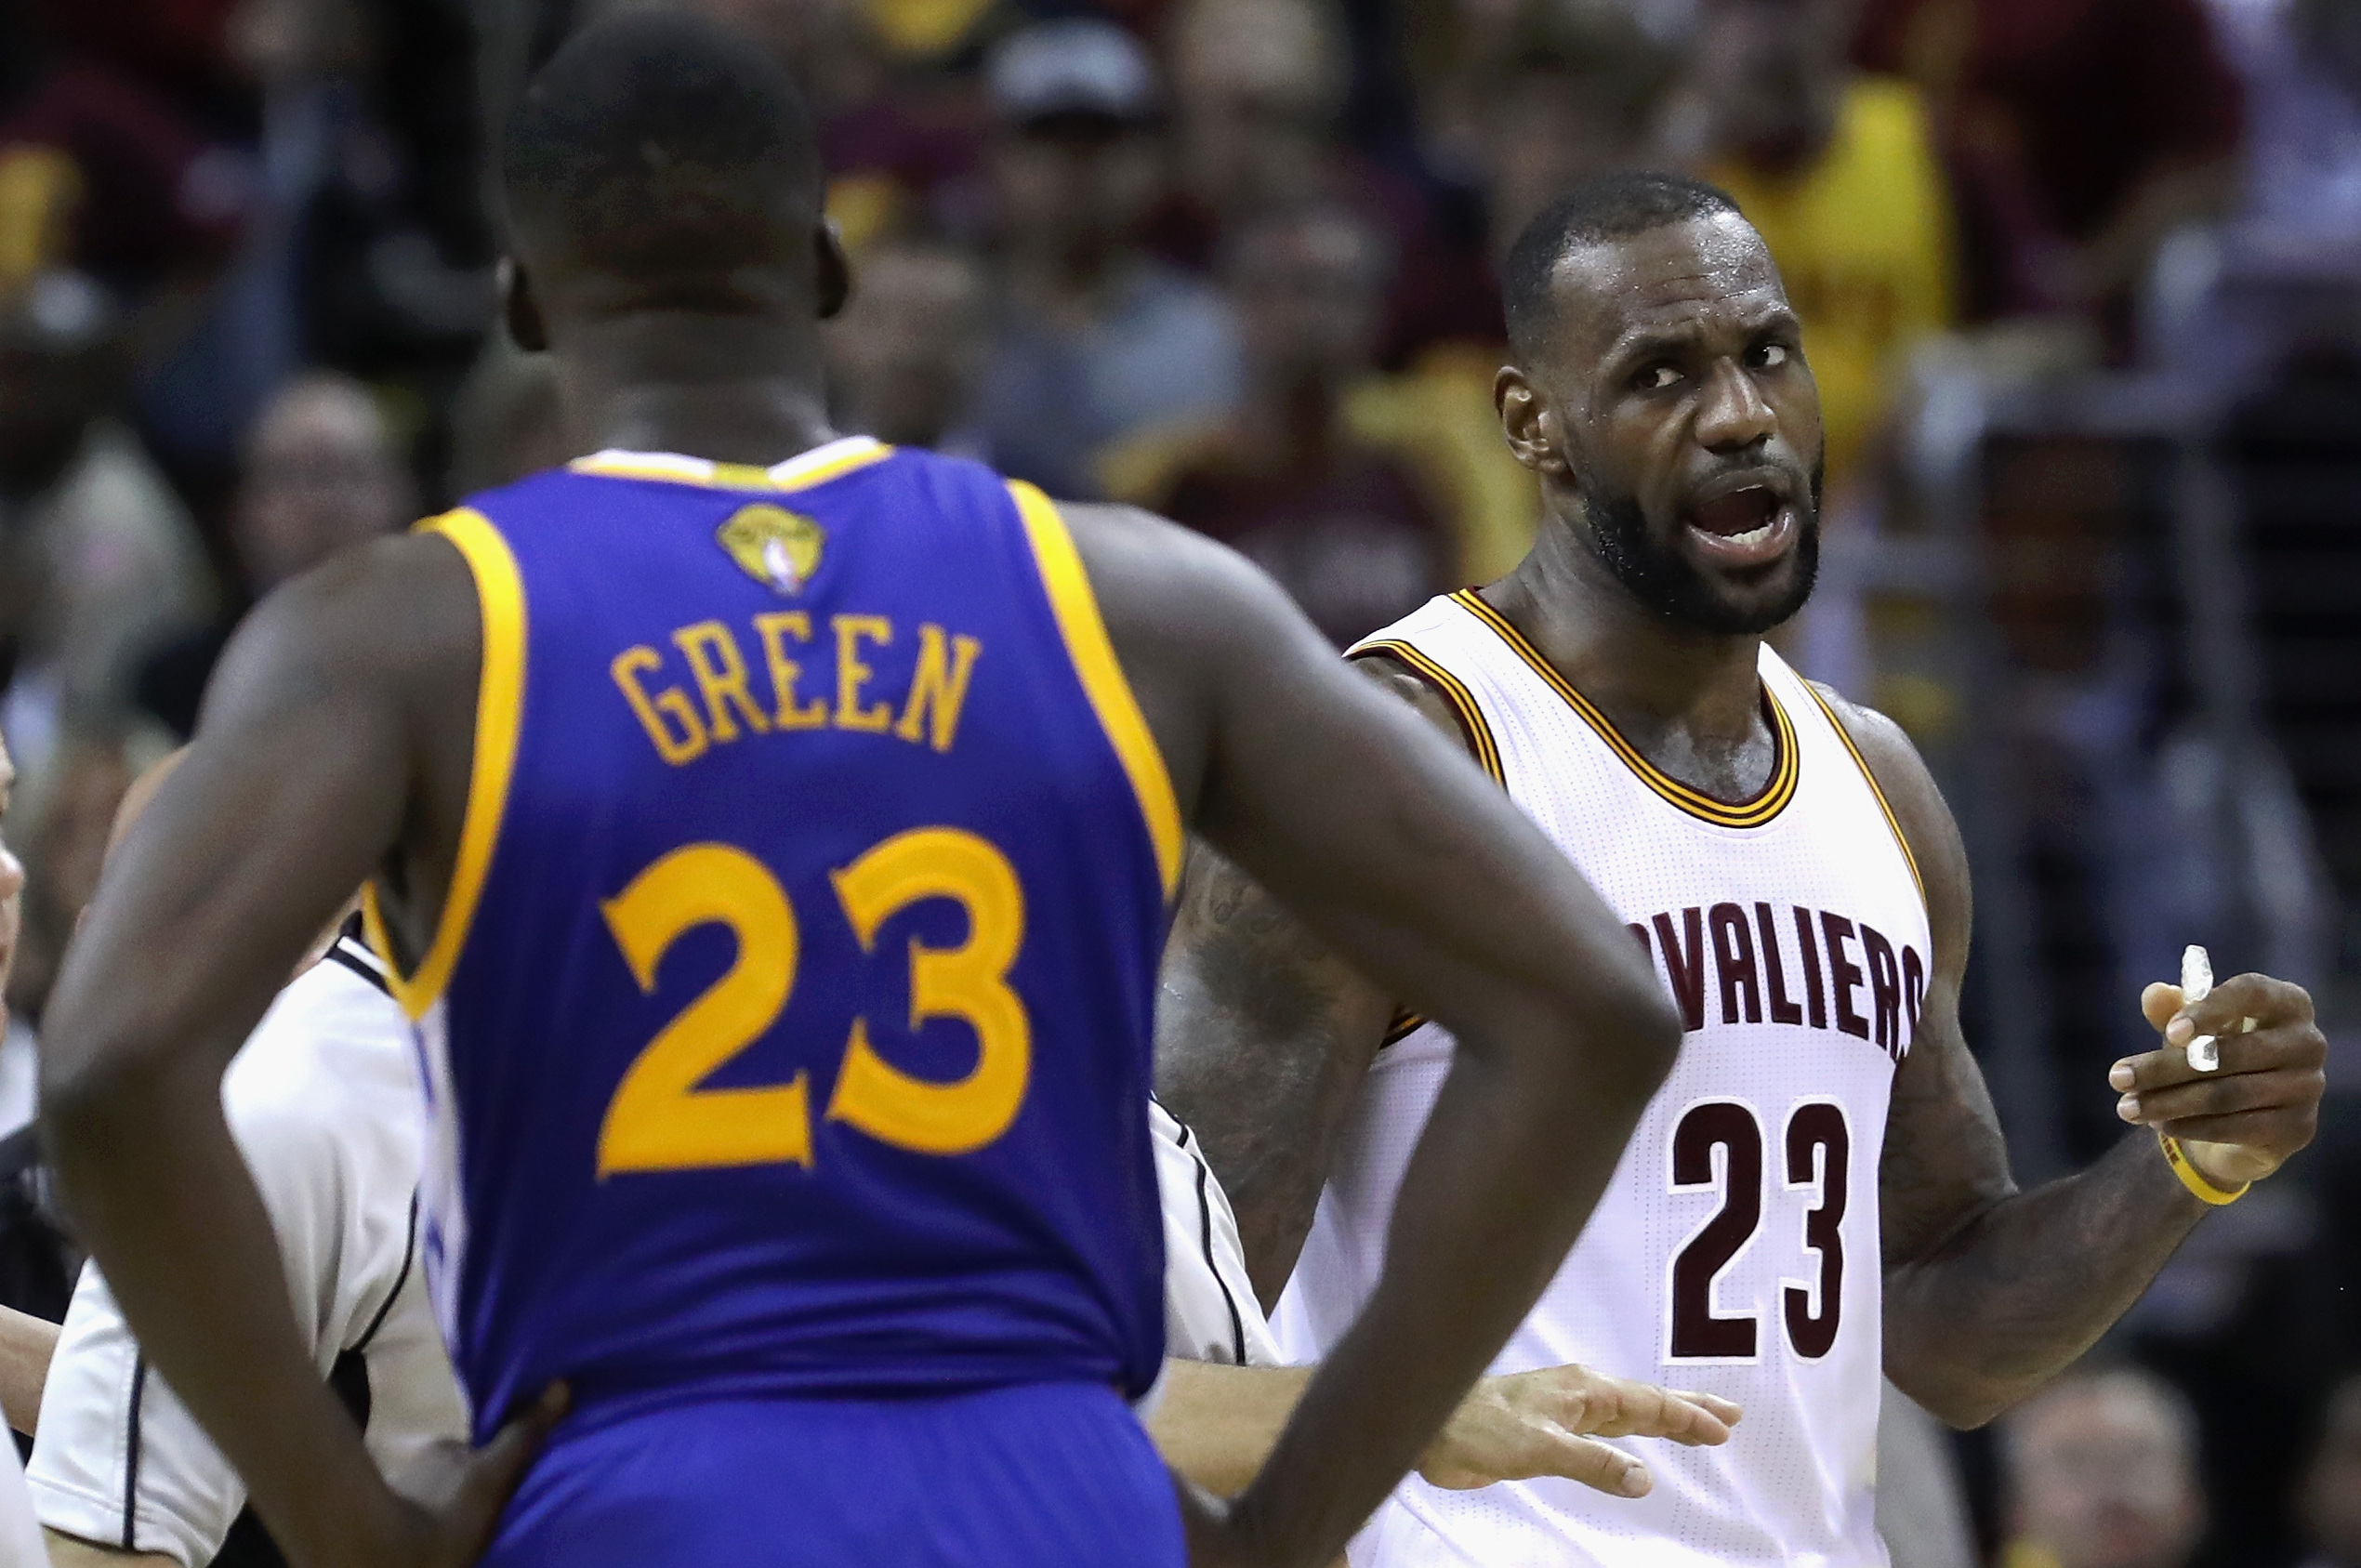 Draymond Green baffled by criticism for LeBron James praise